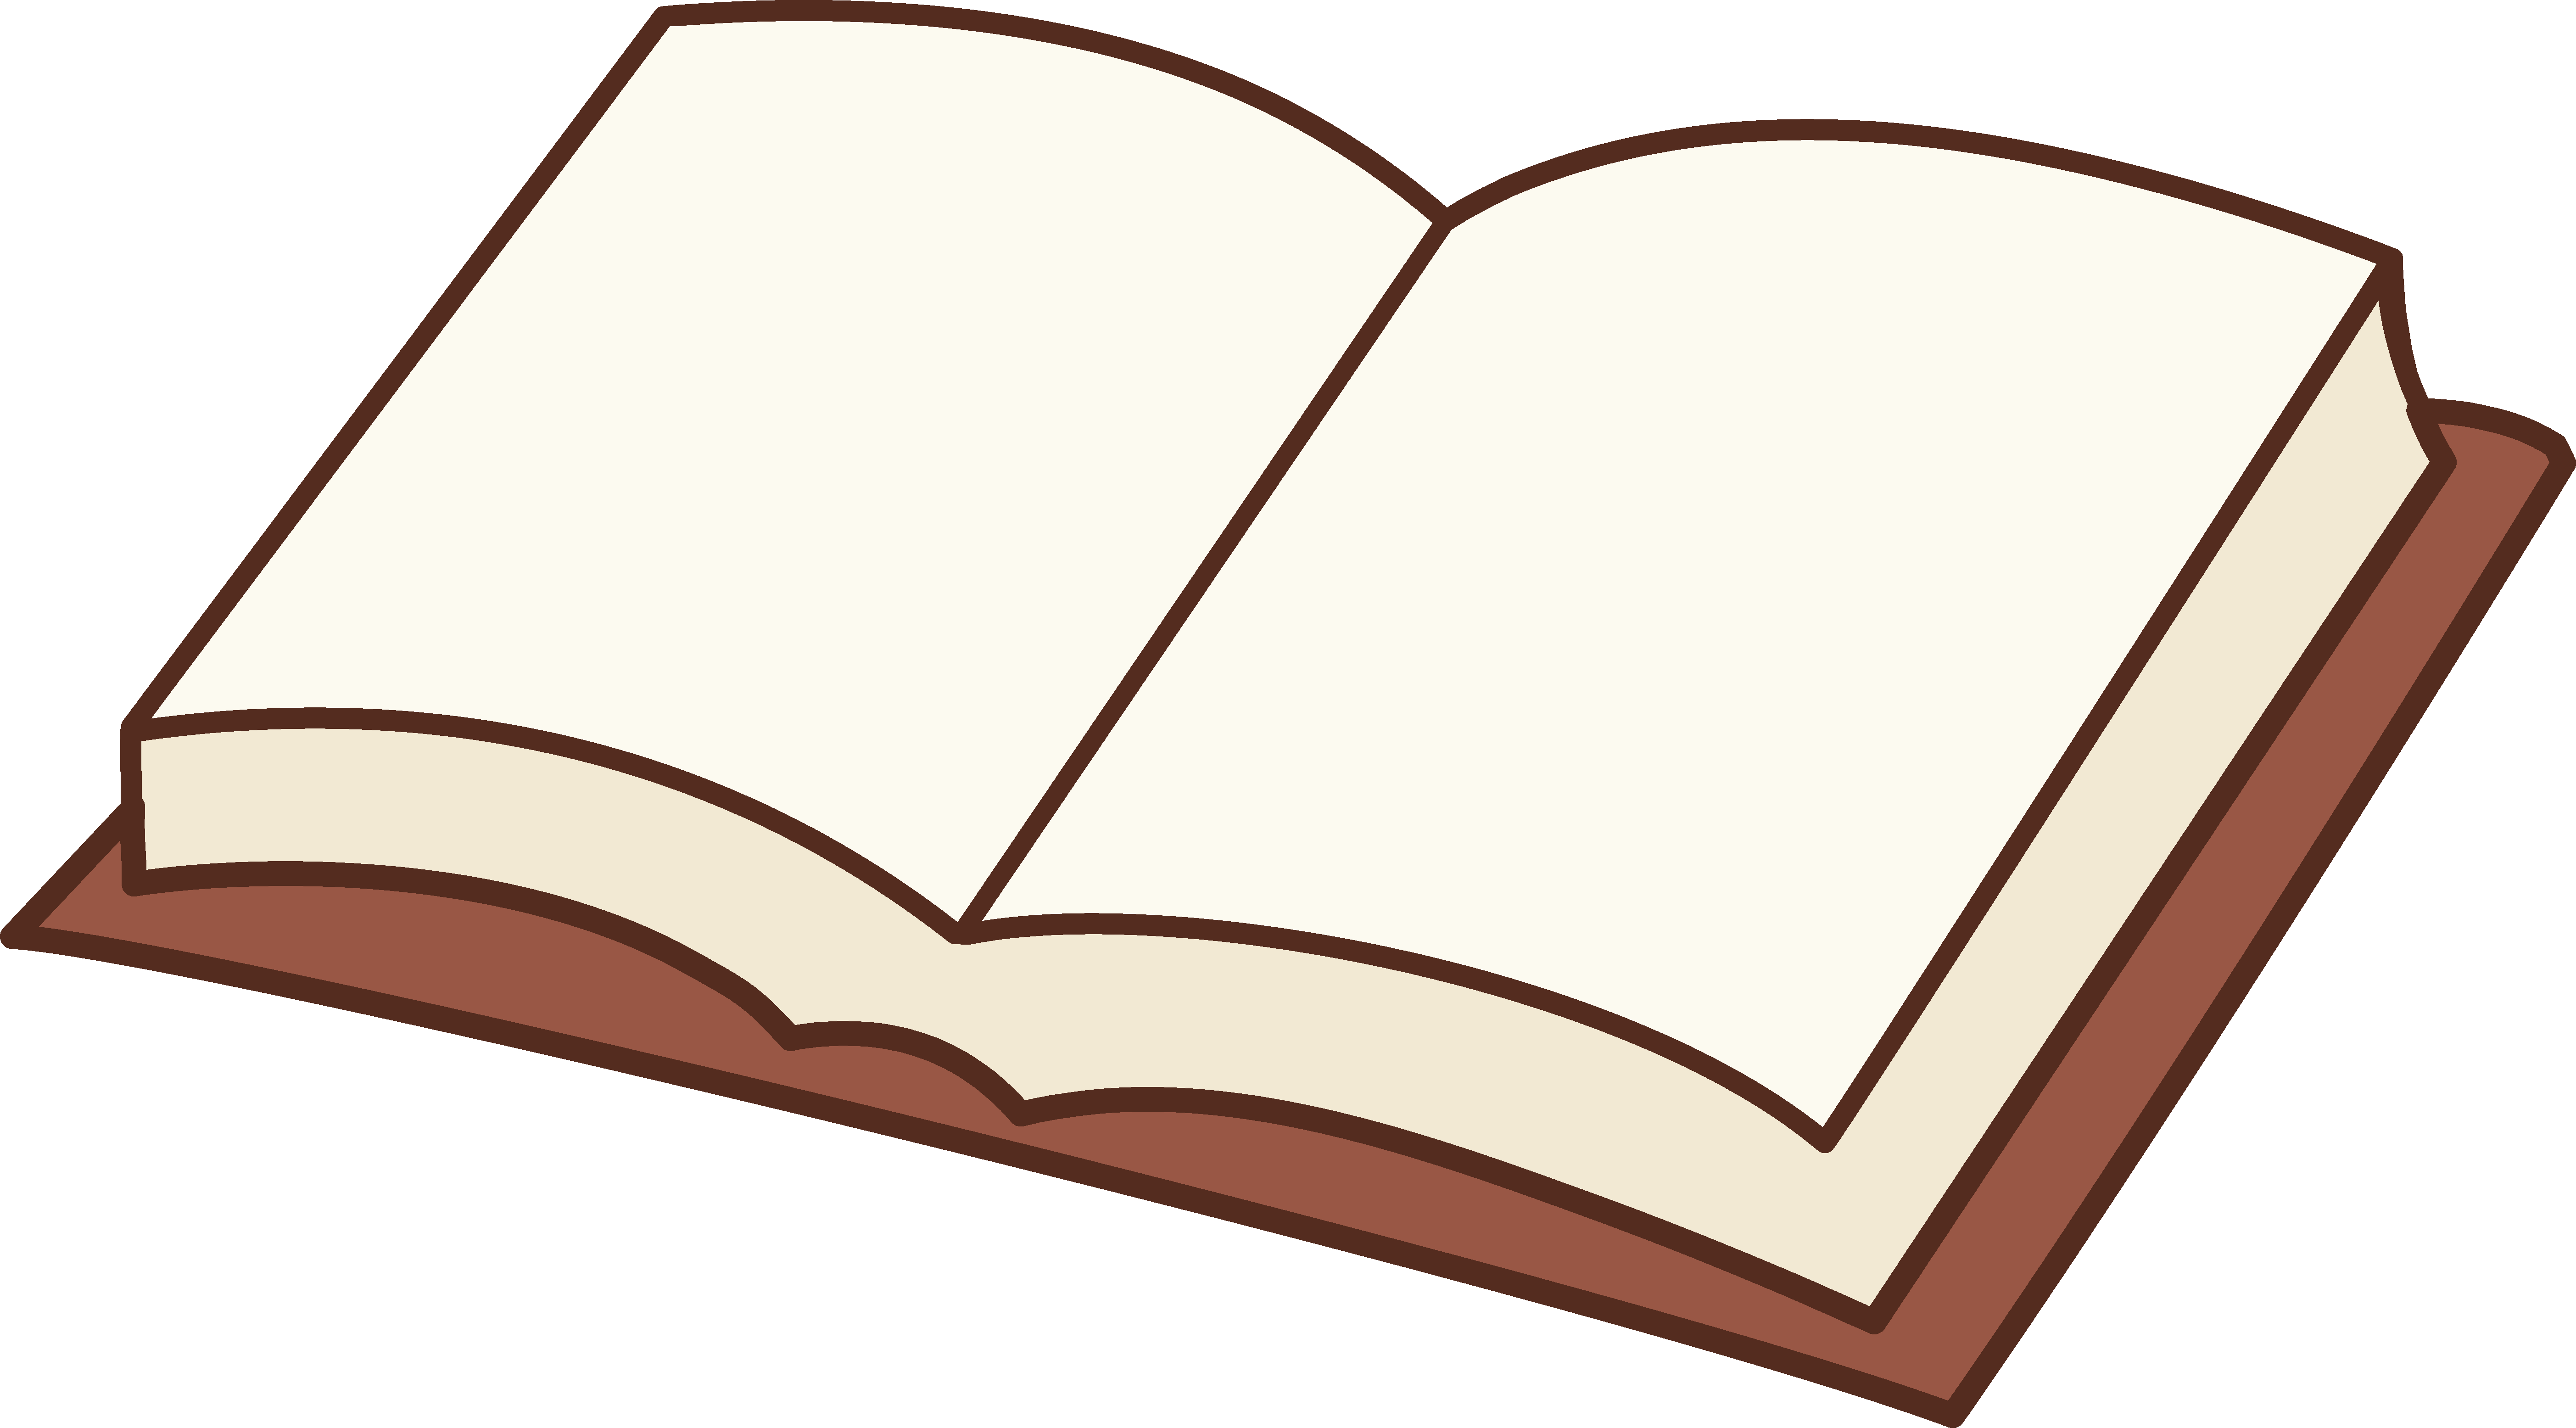 Free Open Book Images Download Free Open Book Images Png Images Free ClipArts On Clipart Library